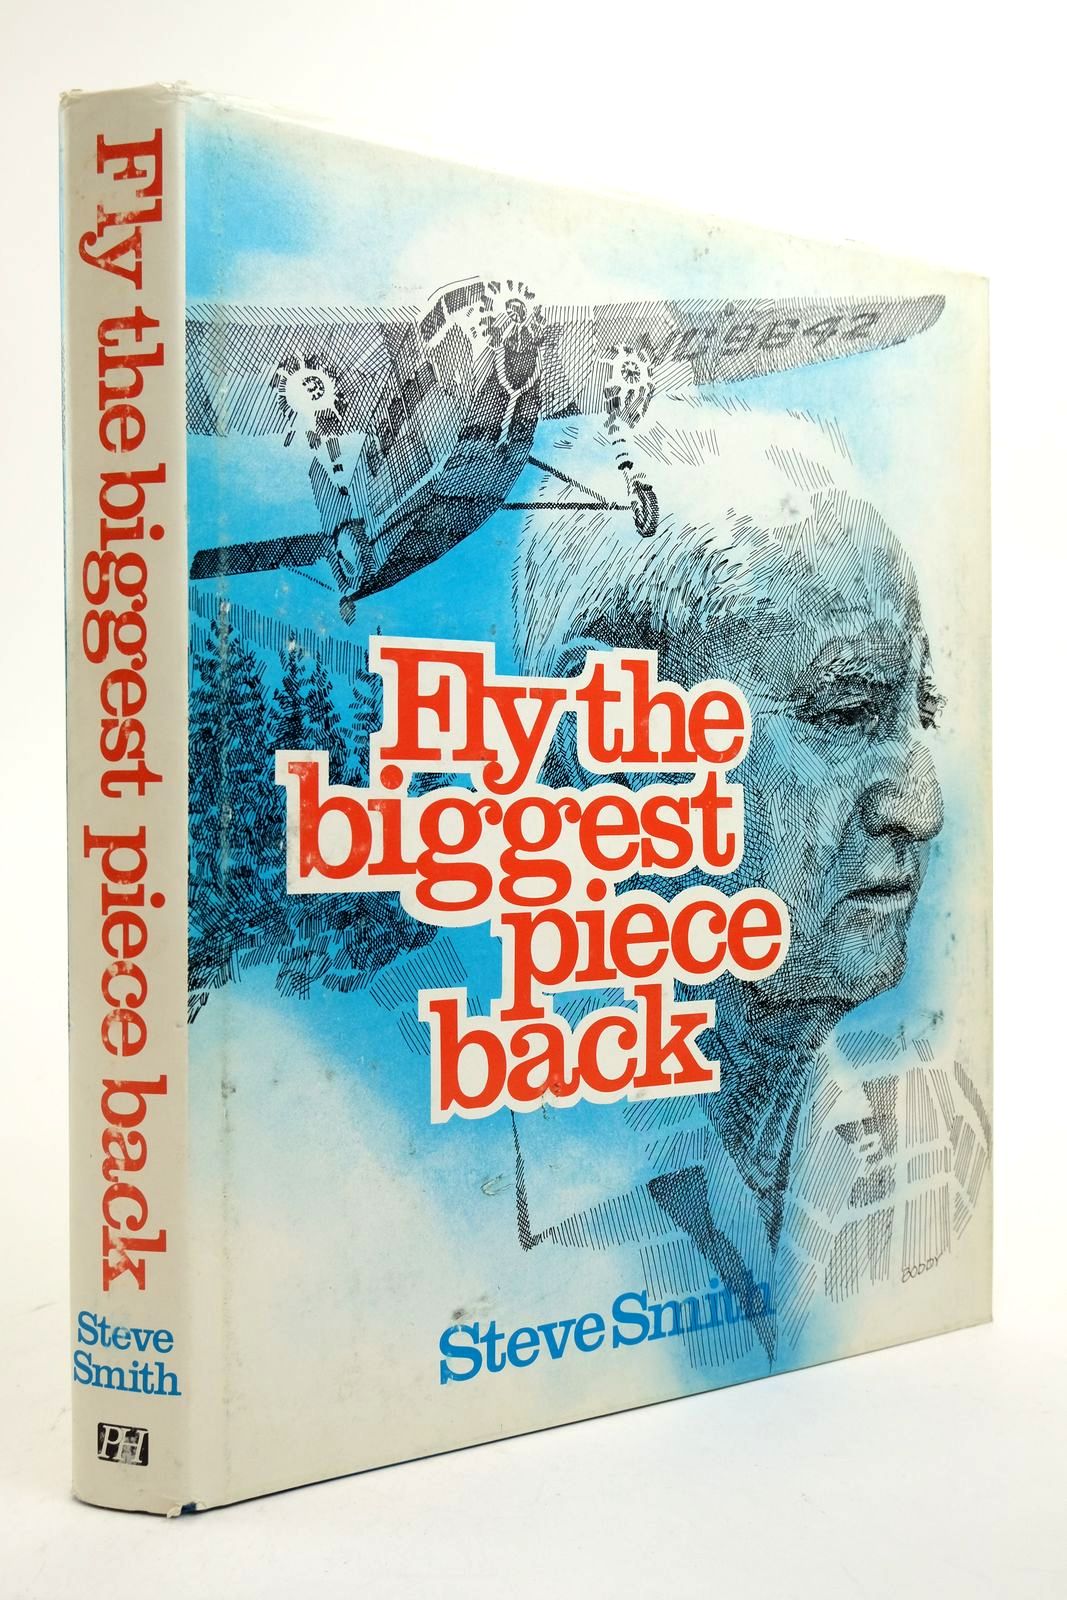 Photo of FLY THE BIGGEST PIECE BACK written by Smith, Steve published by Pictorial Histories Publishing Company (STOCK CODE: 2139355)  for sale by Stella & Rose's Books